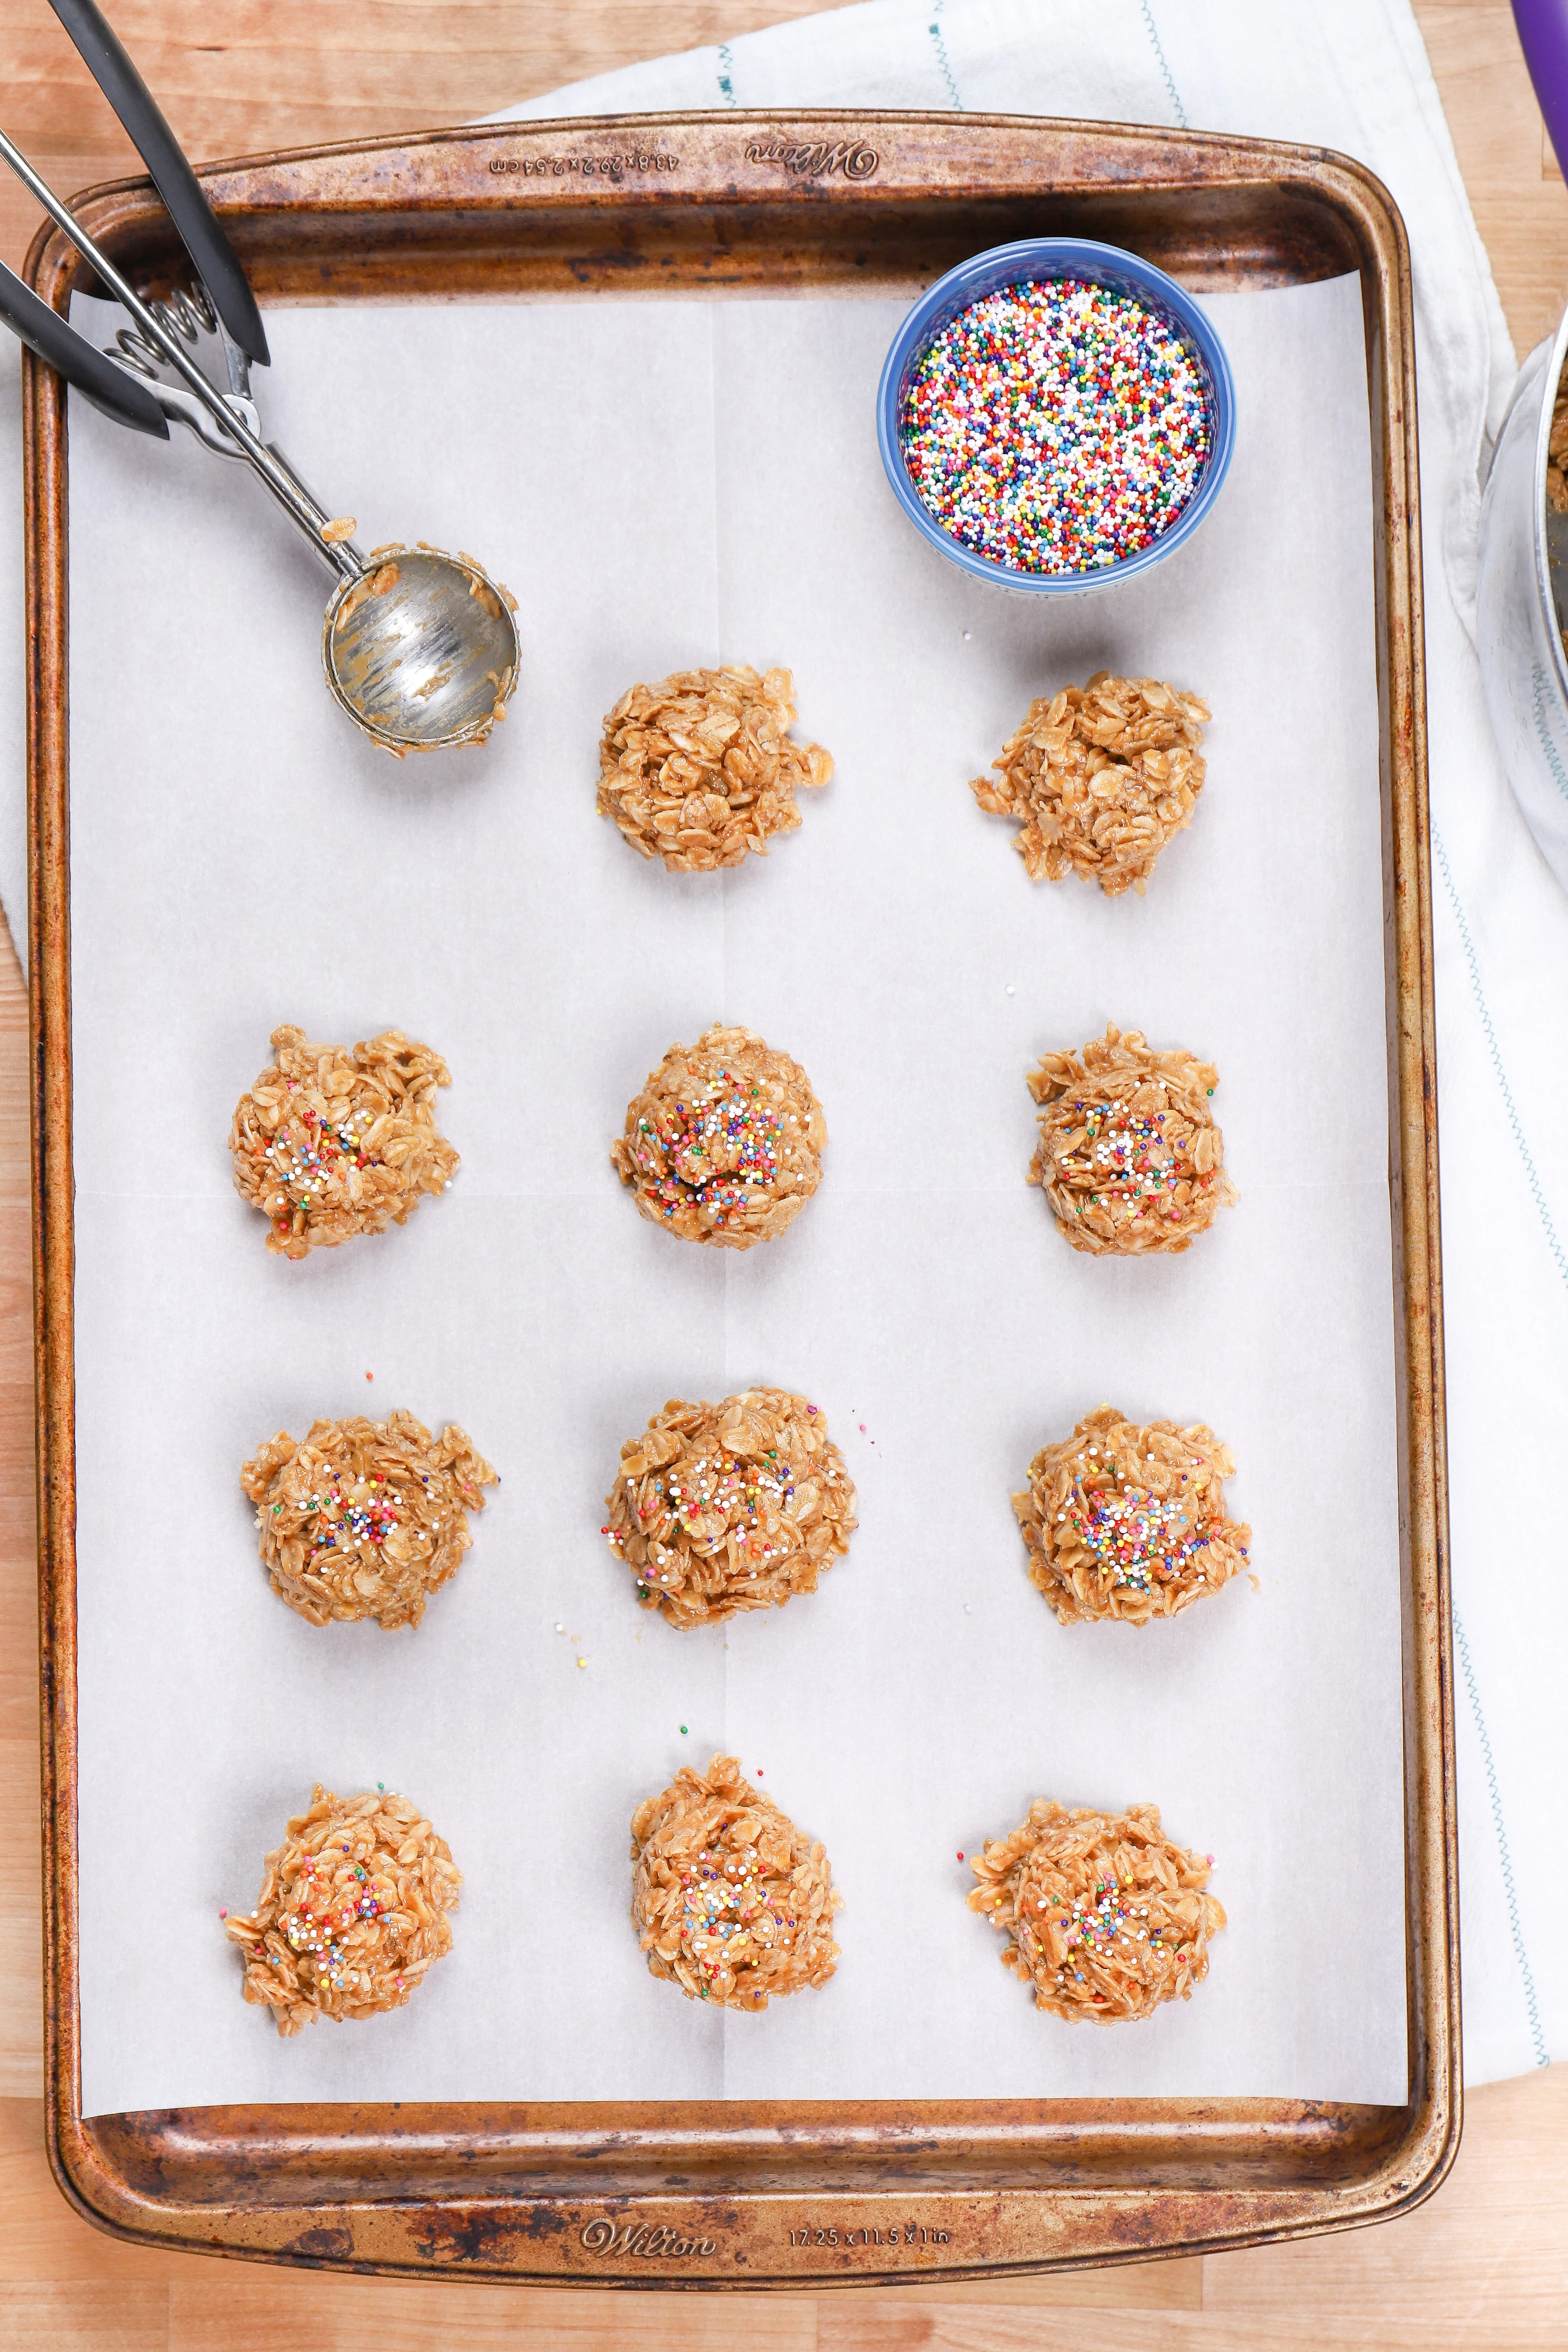 Putting peanut butter no bake cookies on a baking sheet with a cookie scoop